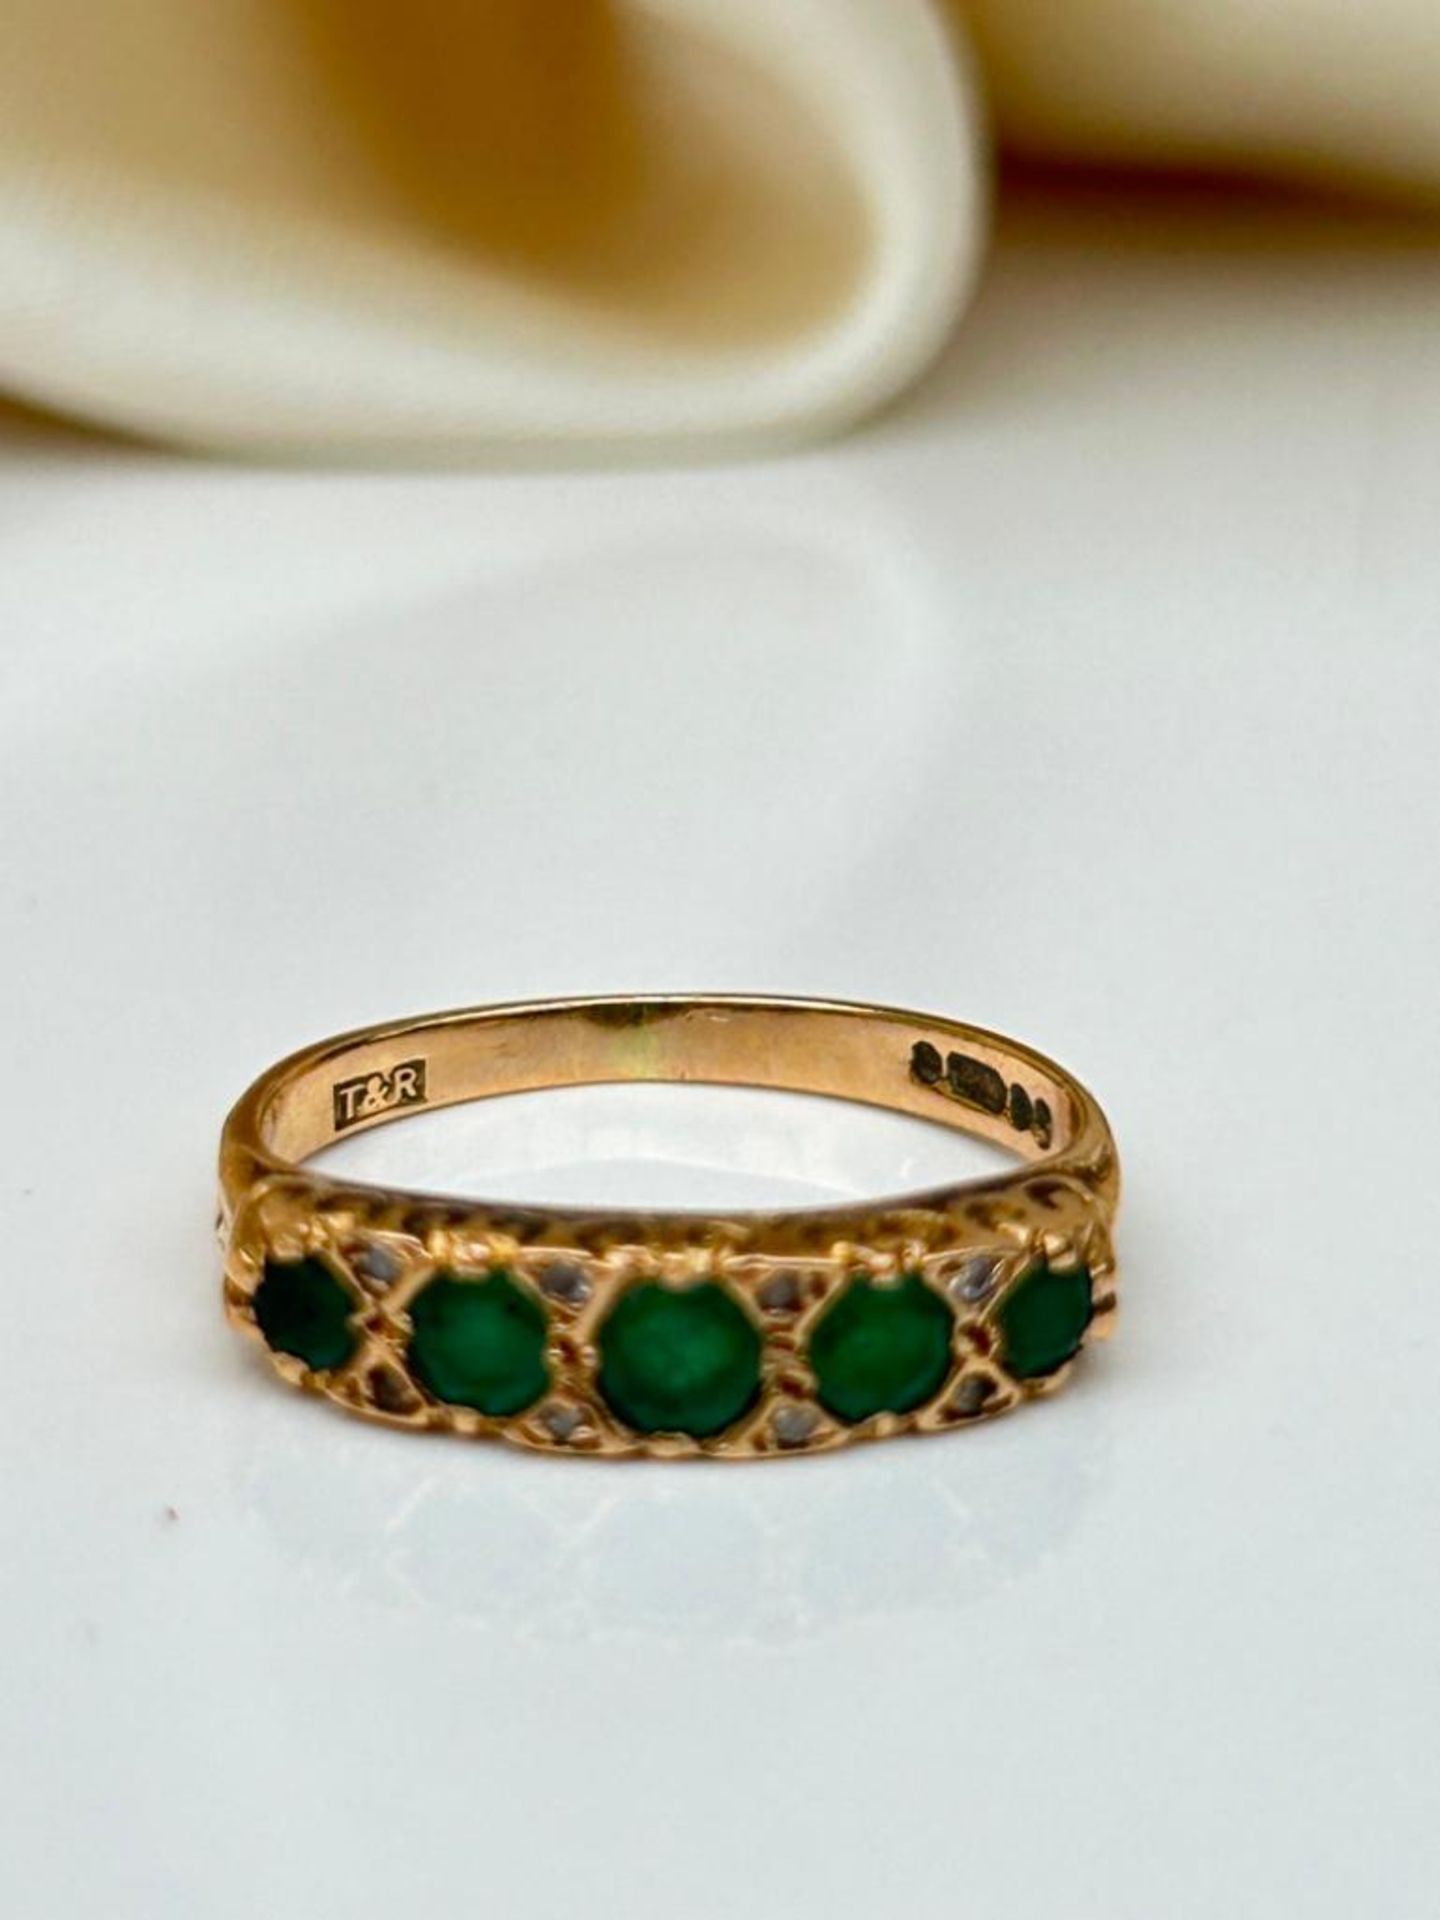 18ct Yellow Gold Emerald 5 Stone Ring with Diamond Points - Image 7 of 8